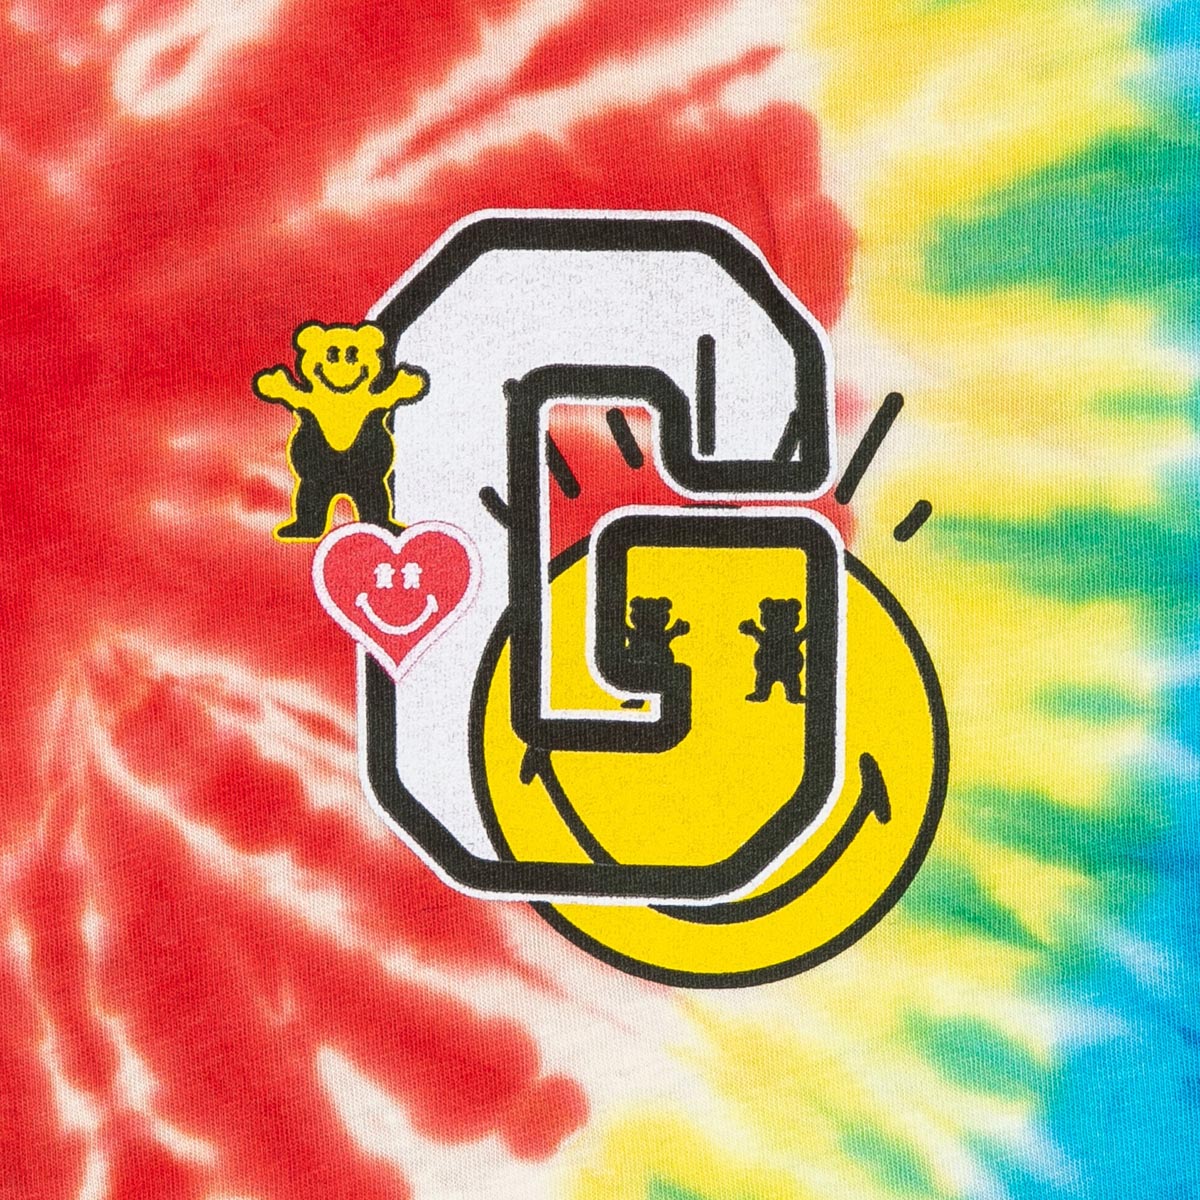 Grizzly x Smiley World T-Shirt - Tie Dye image 4